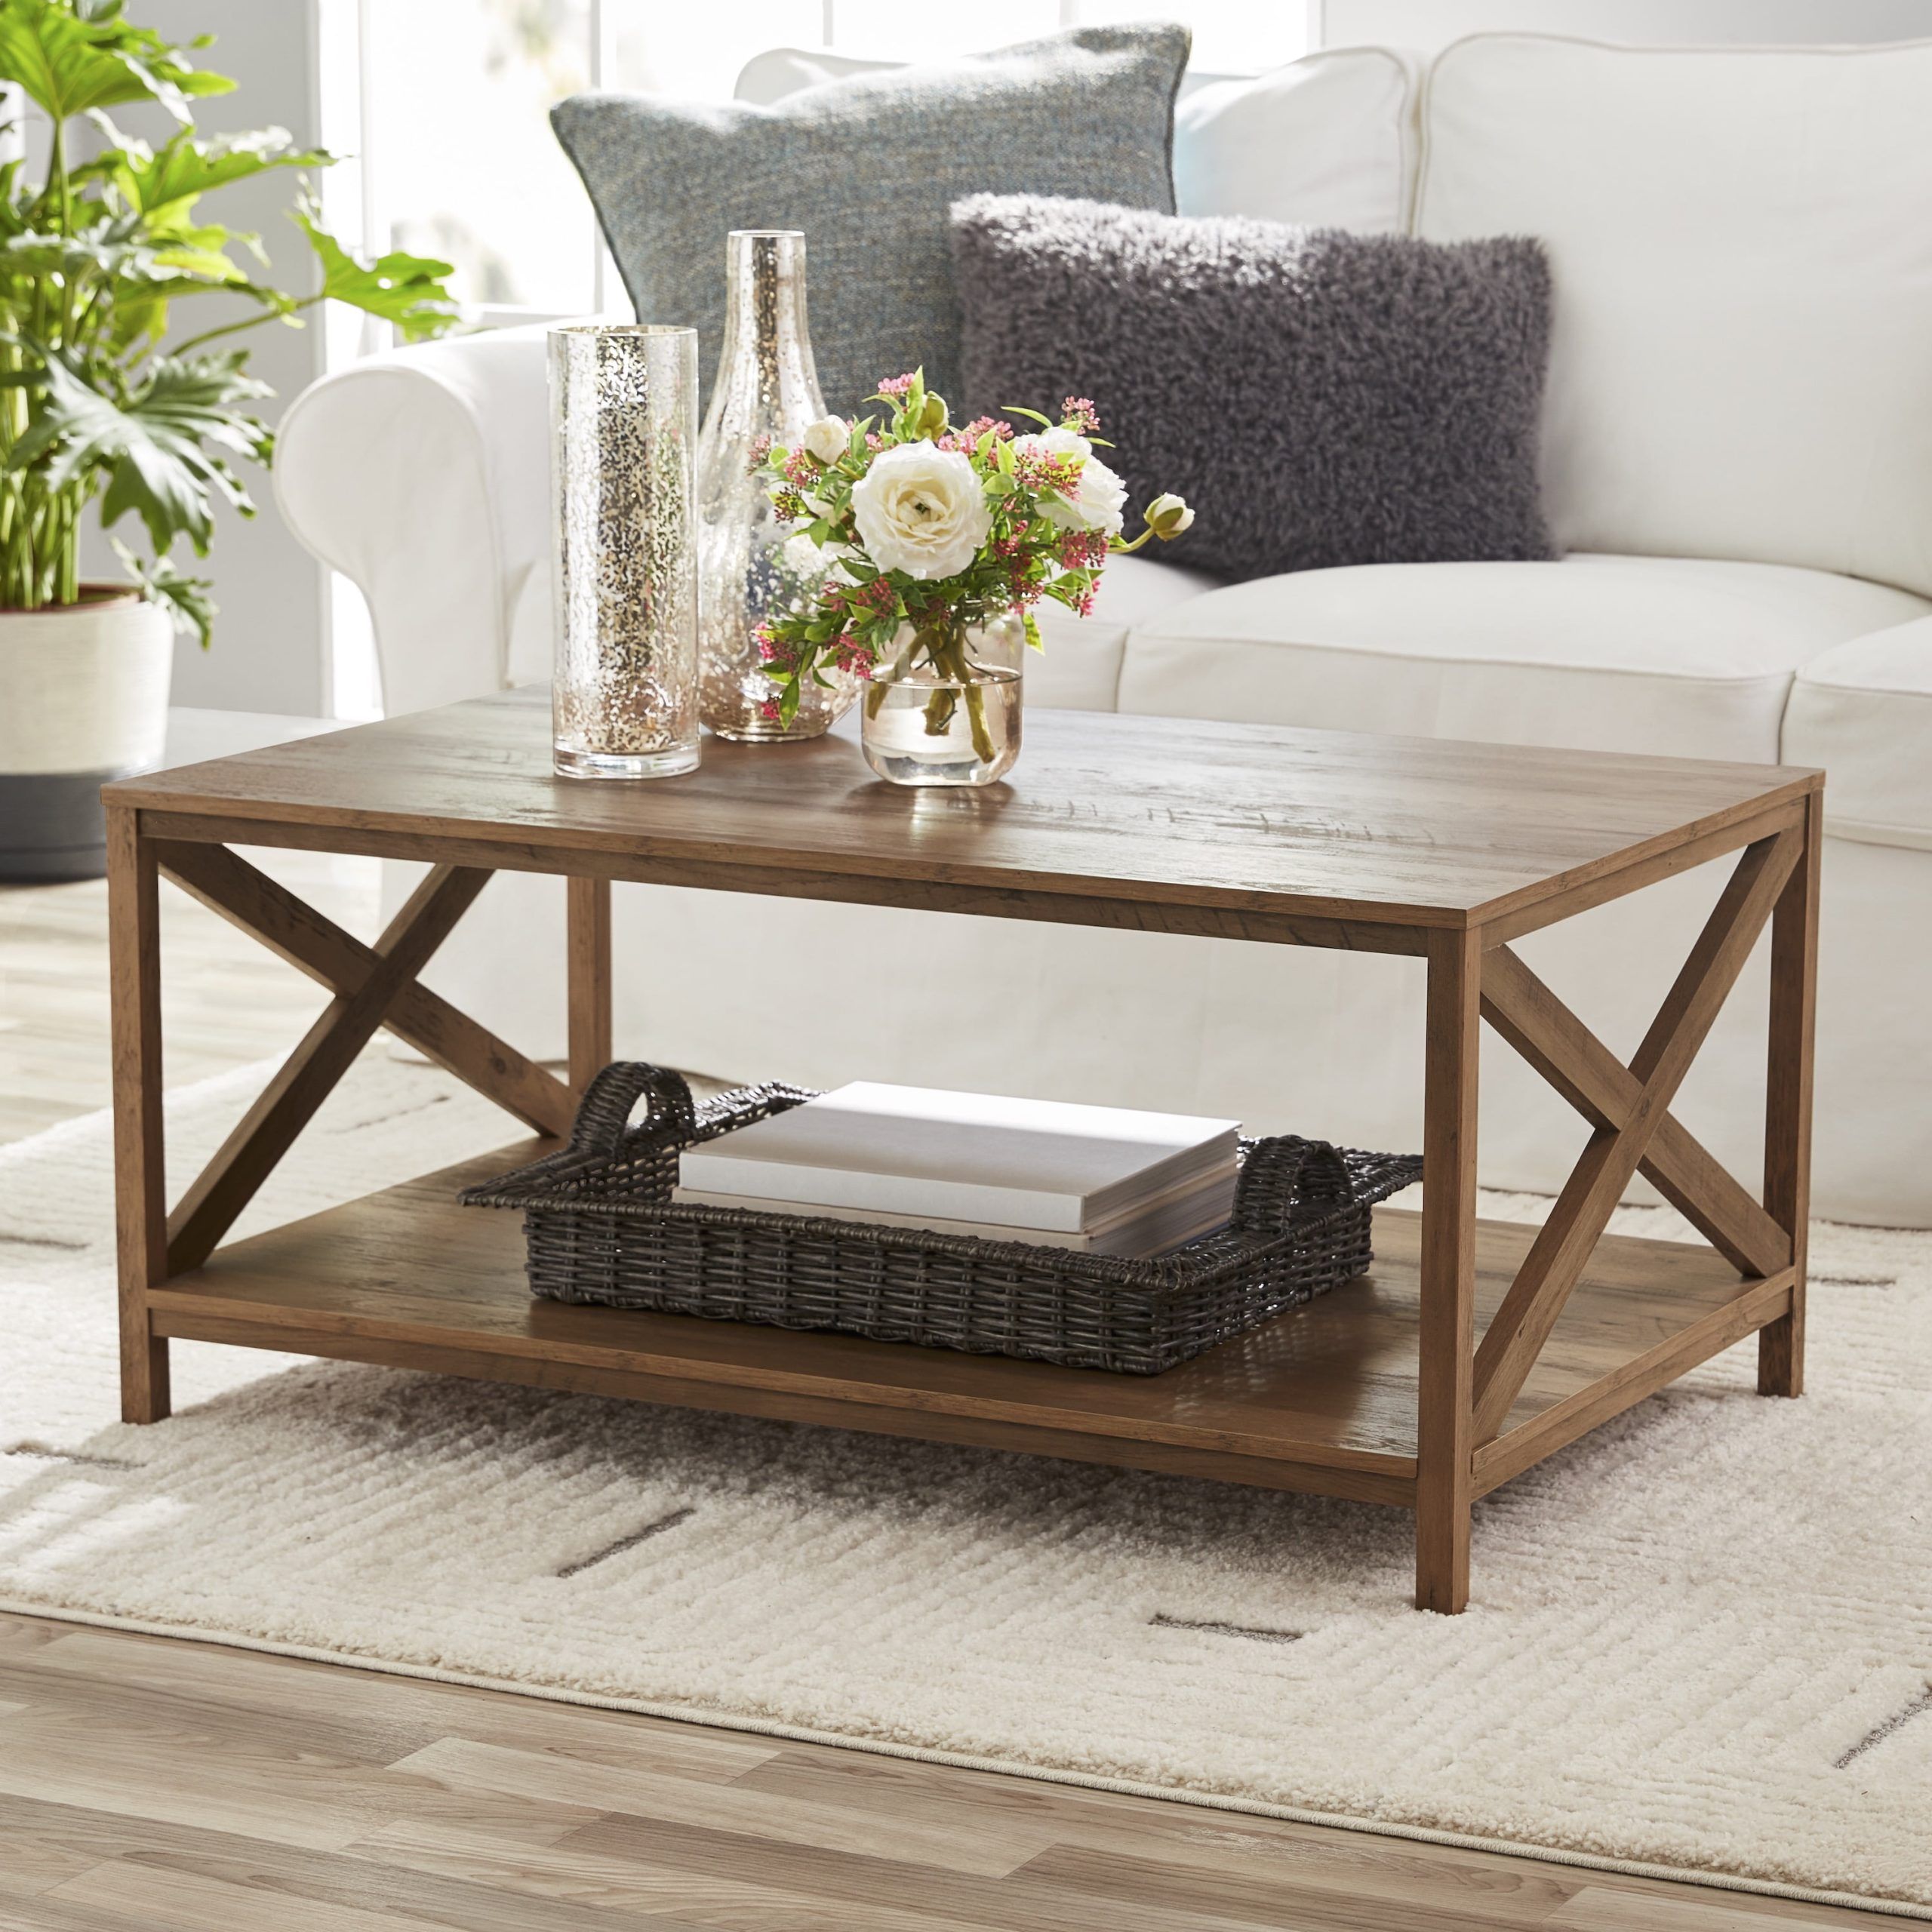 Mainstays Farmhouse Rectangle Coffee Table, Rustic Weathered Oak –  Walmart Intended For Fashionable Rectangle Coffee Tables (View 8 of 10)